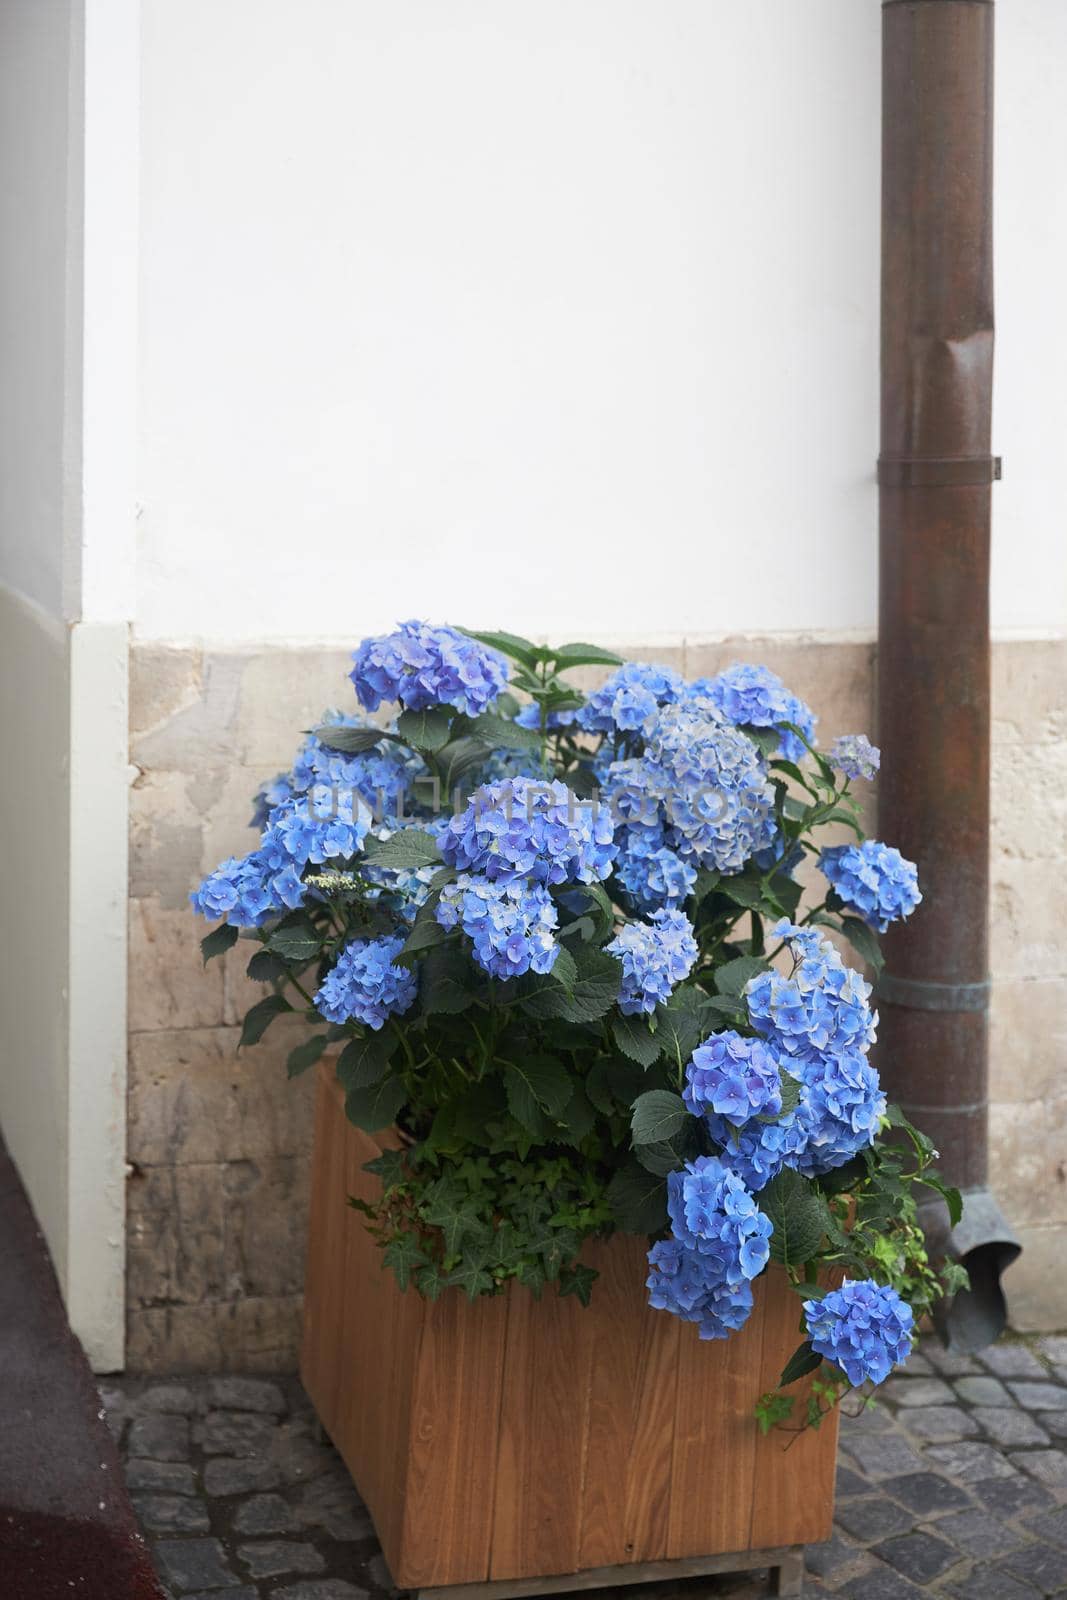 Blue hydrangea bushes in a wooden tub decorate the entrance to the restaurant by elenarostunova